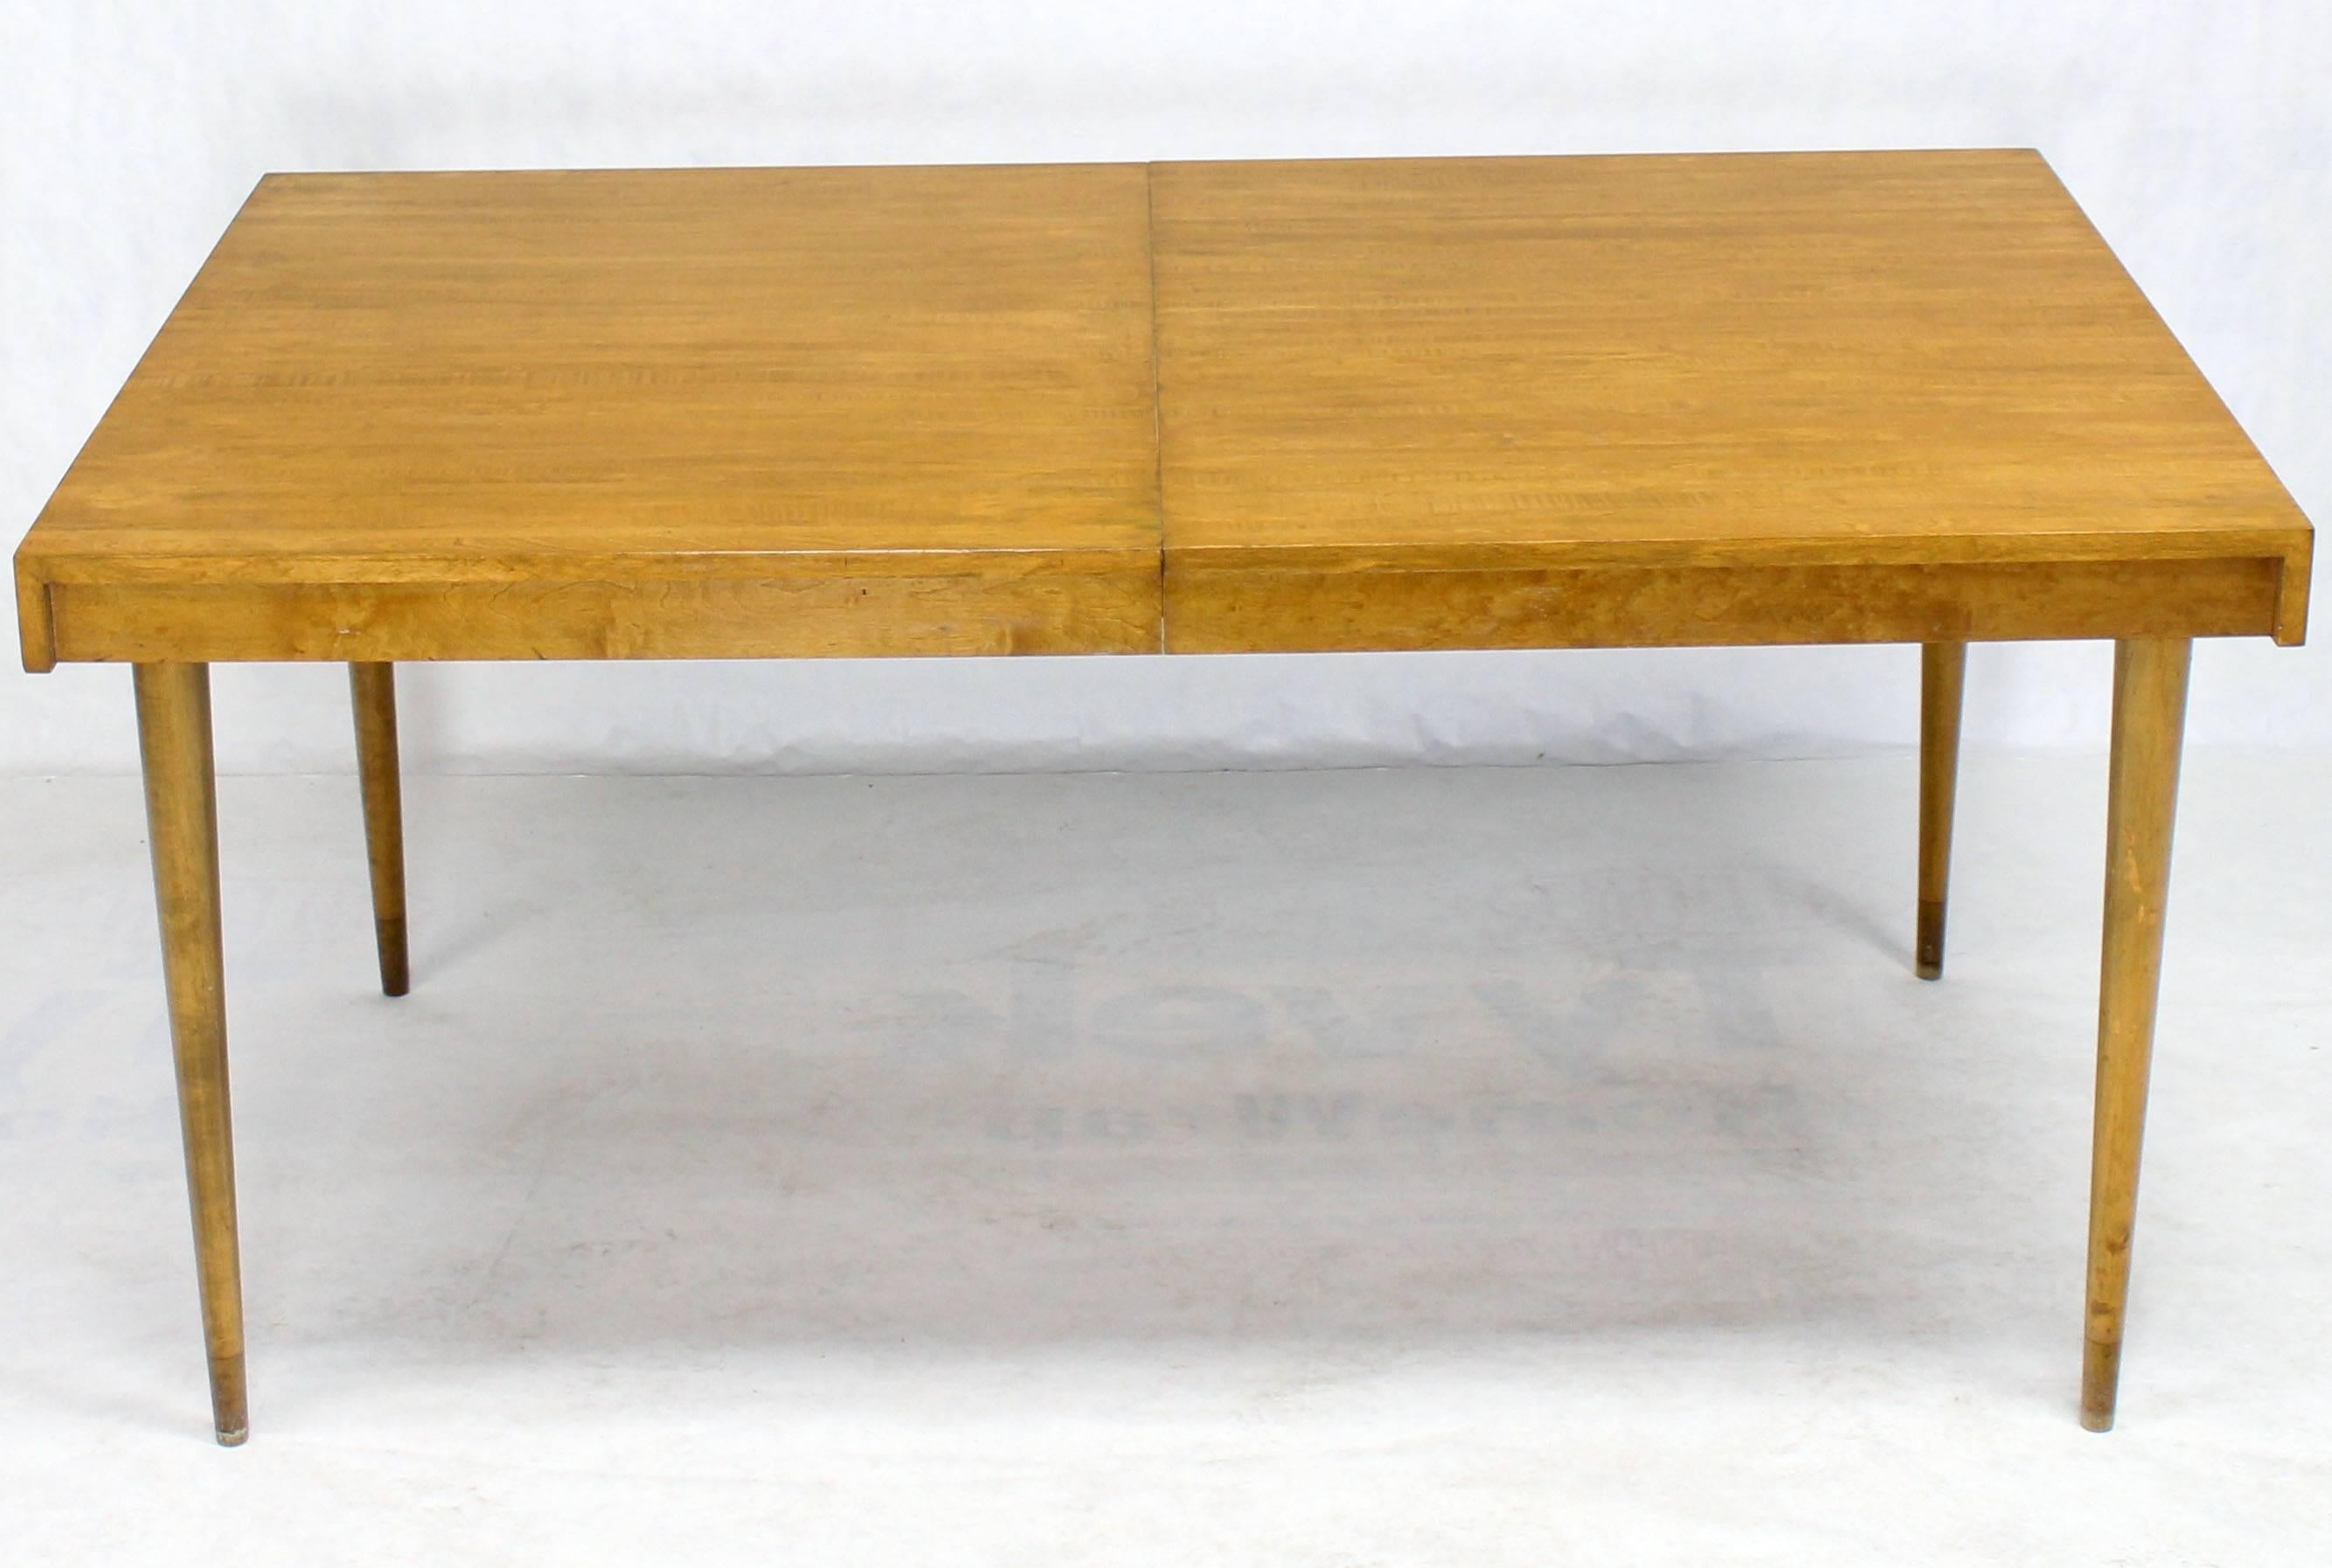 Swedish Blond Birch Dining Table w/ Two Extension Boards Leafs  In Excellent Condition For Sale In Rockaway, NJ